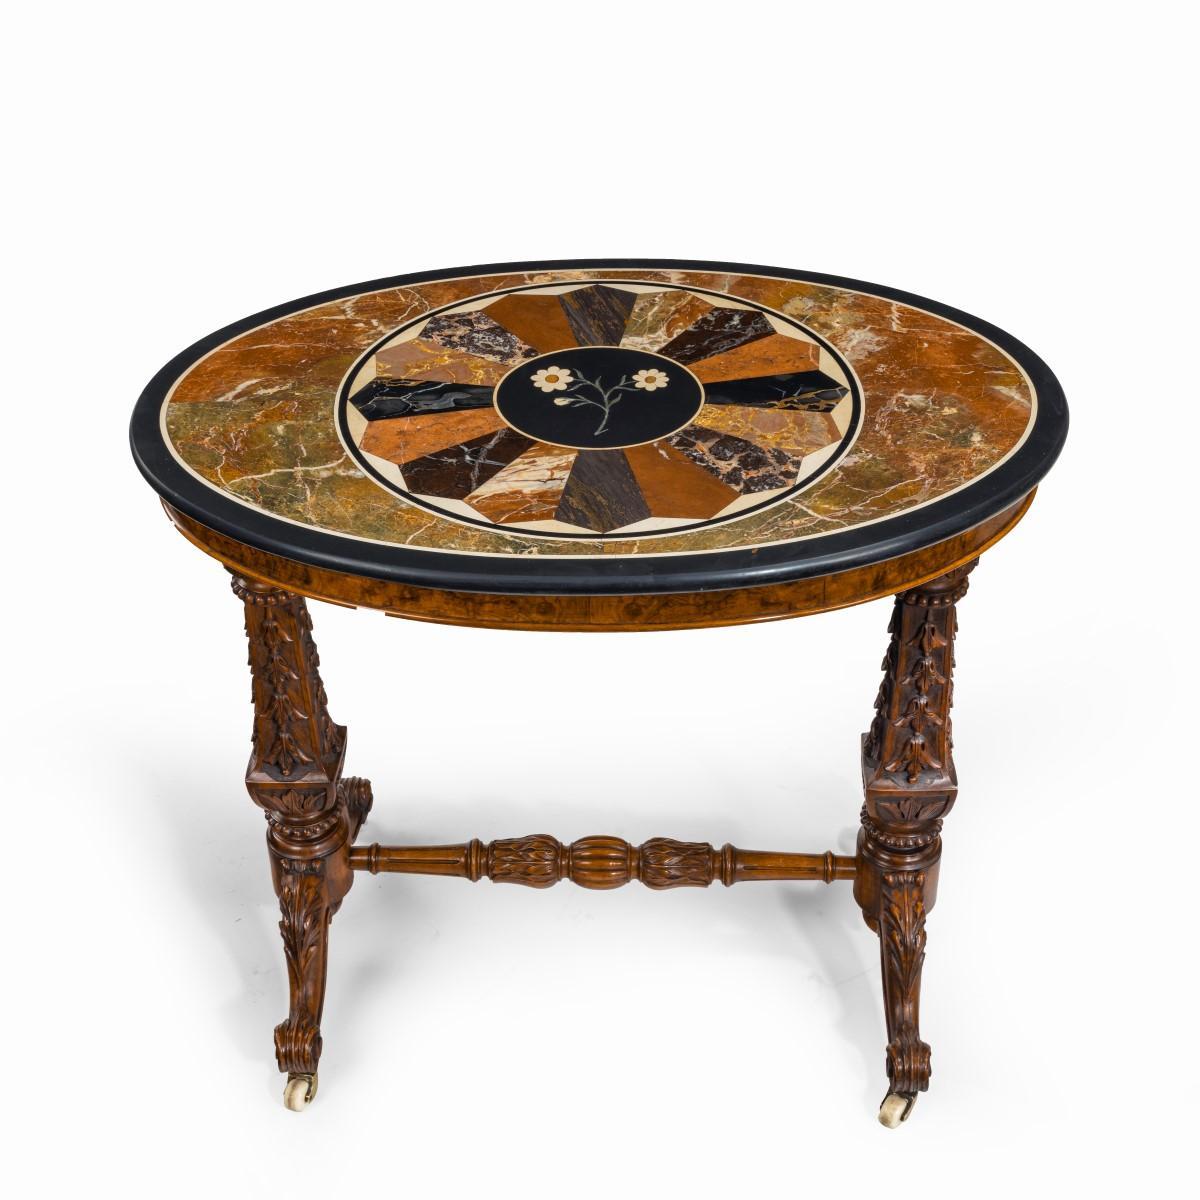 British Mid-Victorian Walnut and Pietra Dura Table For Sale